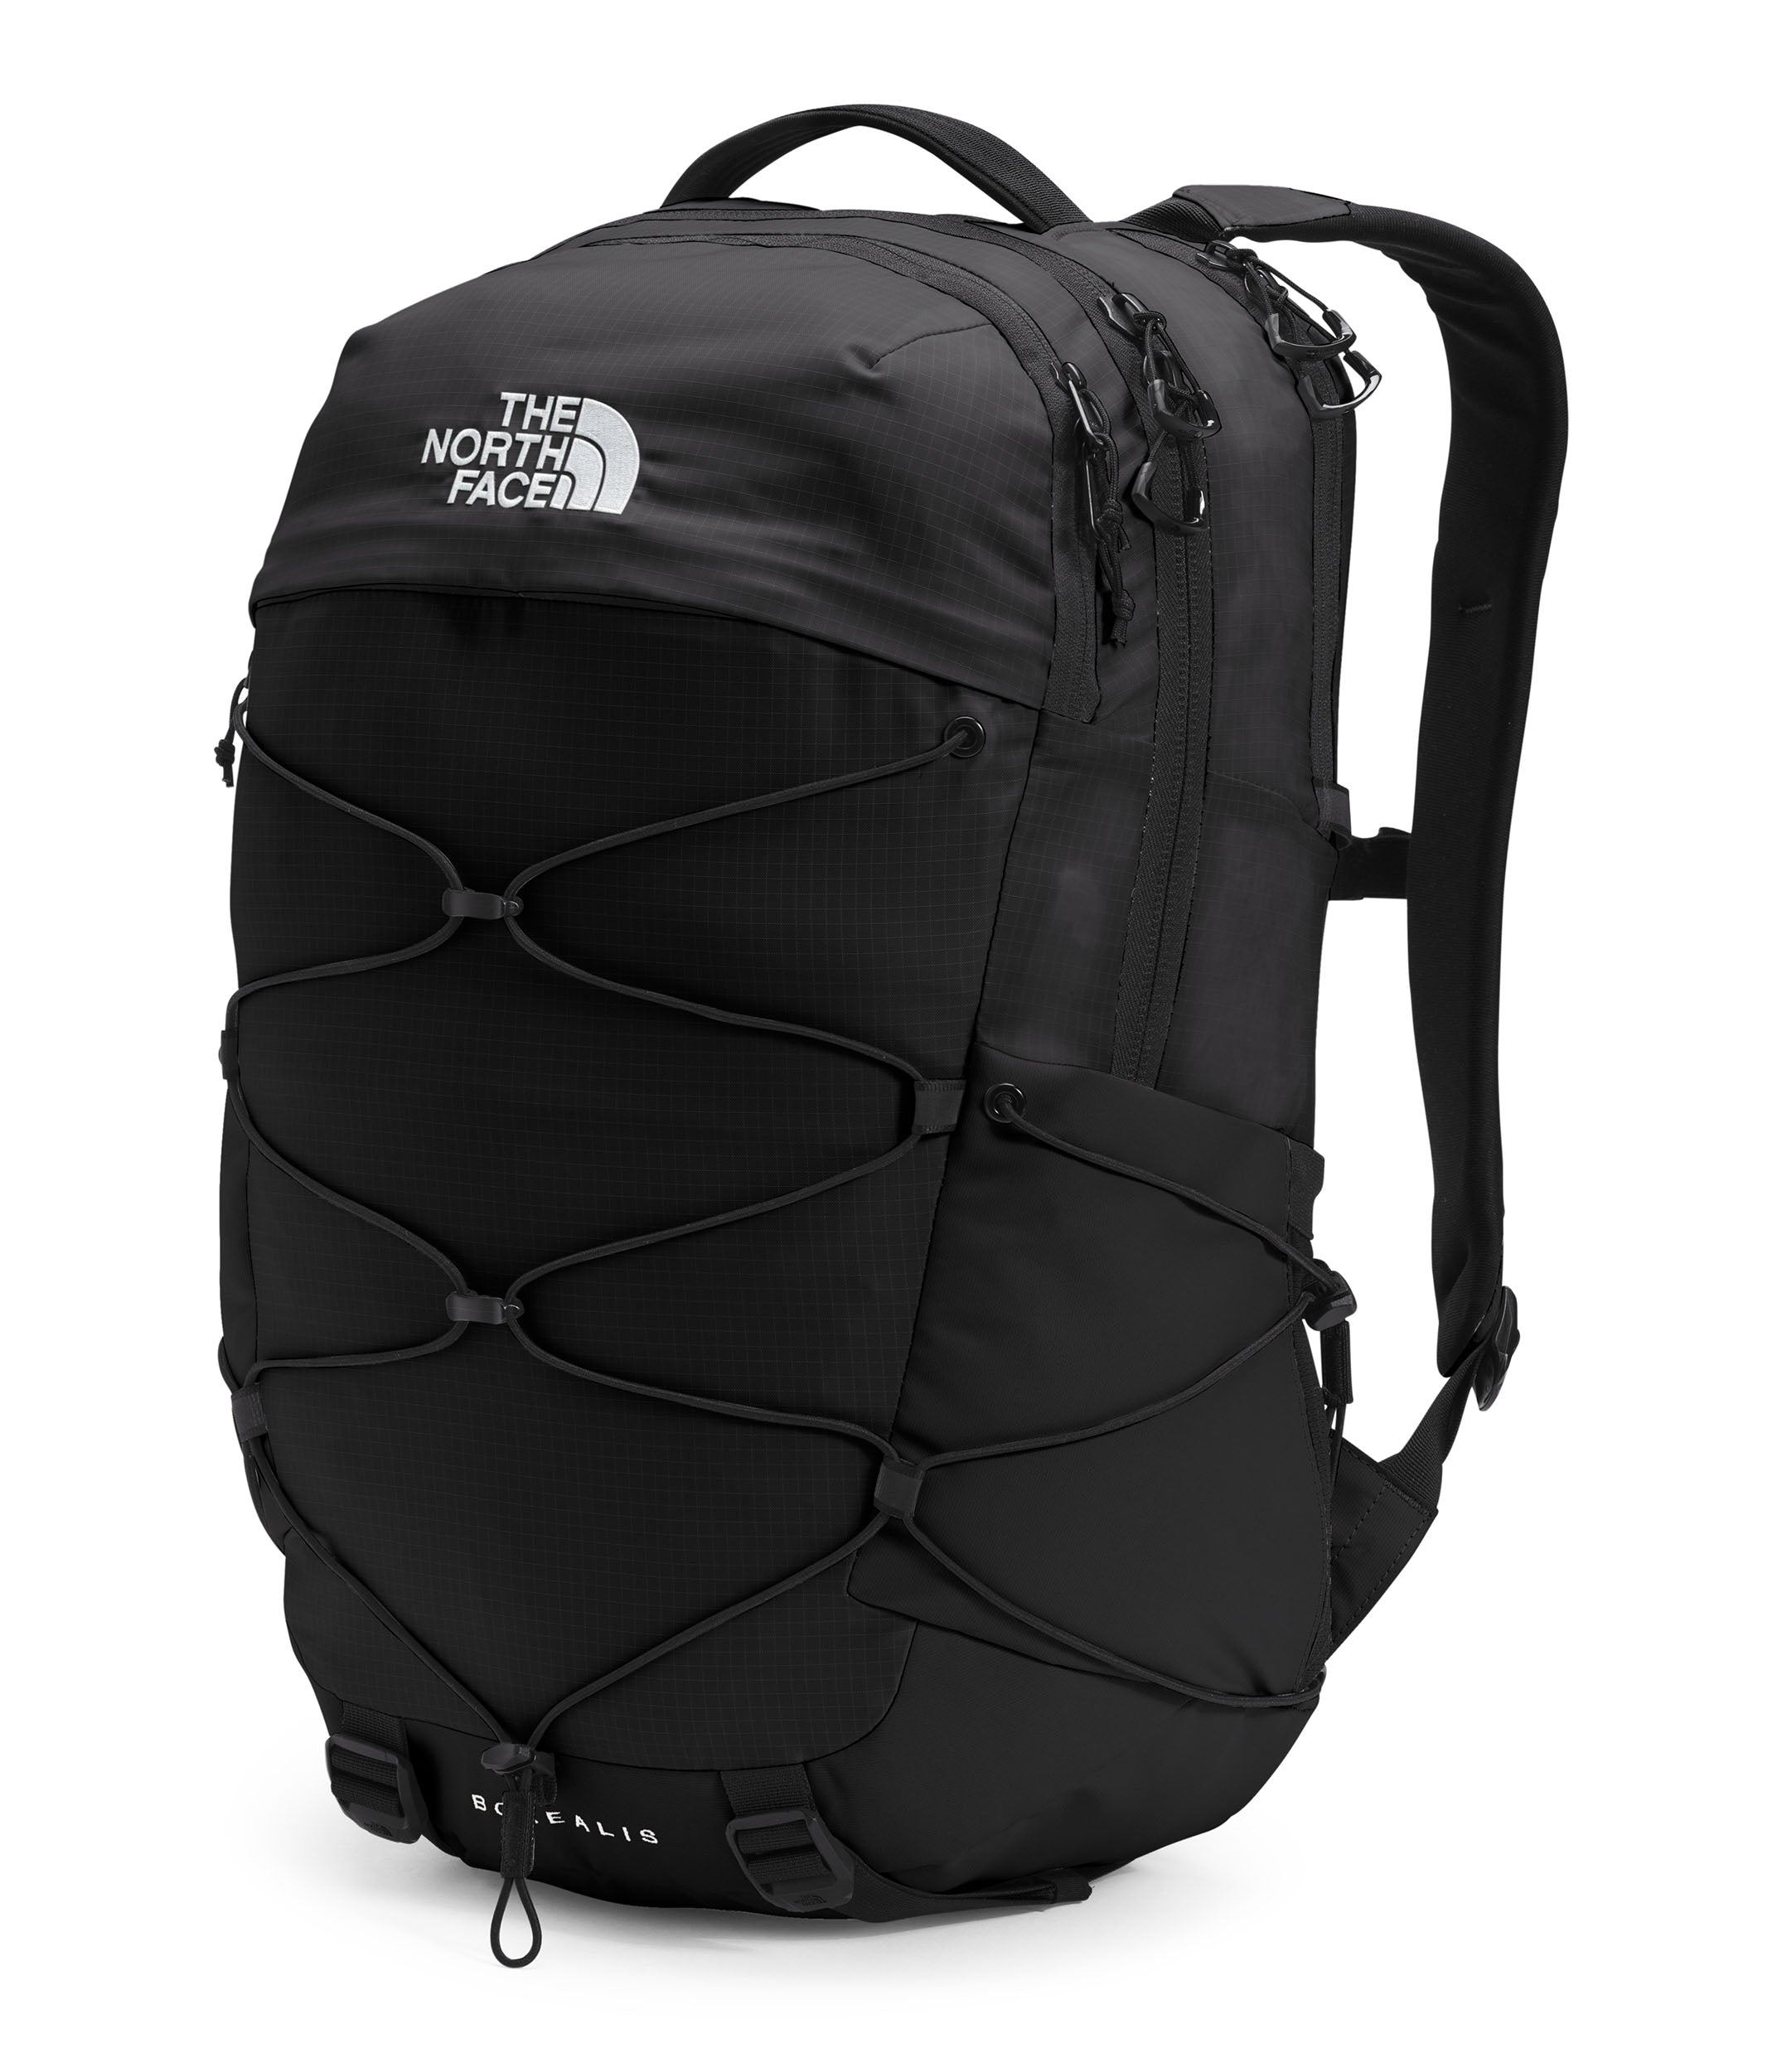 The North Face Borealis Backpack Accessories North Face   